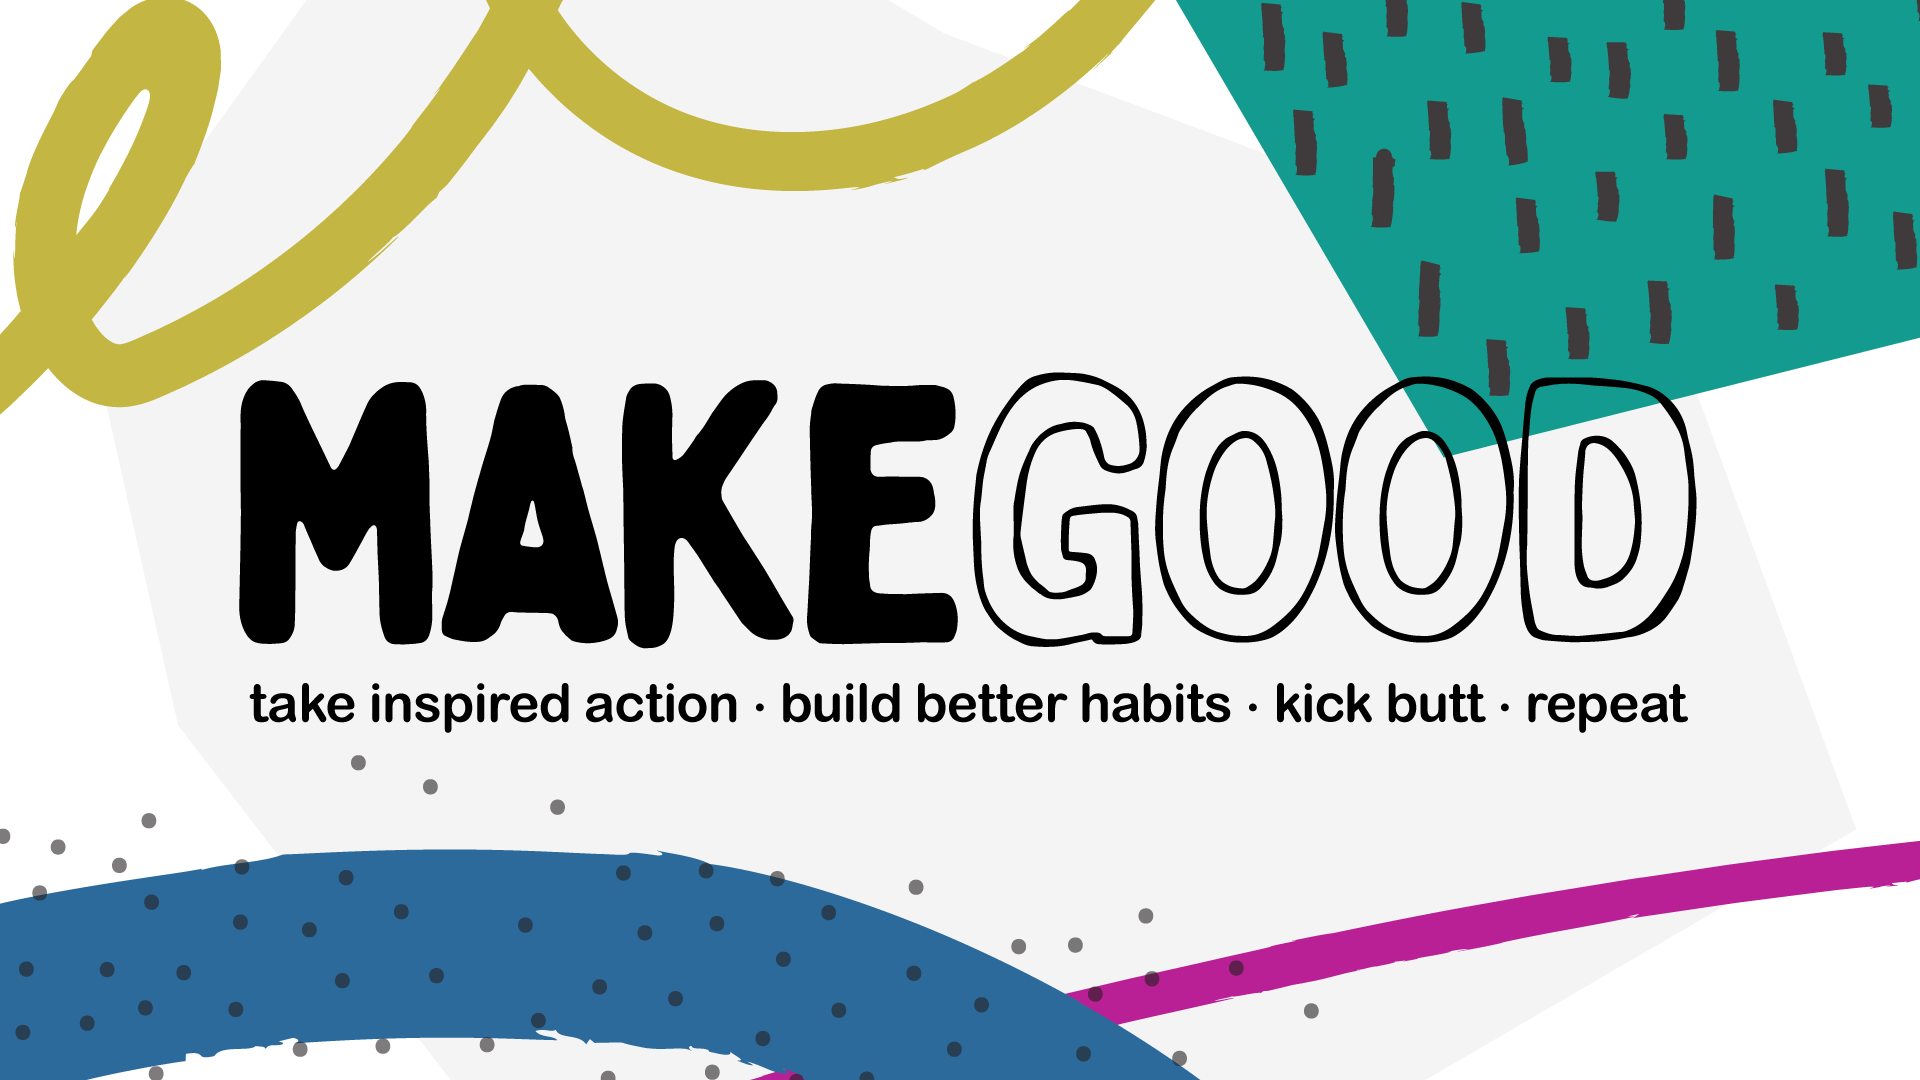 MAKE GOOD – take inspired action, build better habits, kick butt and repeat